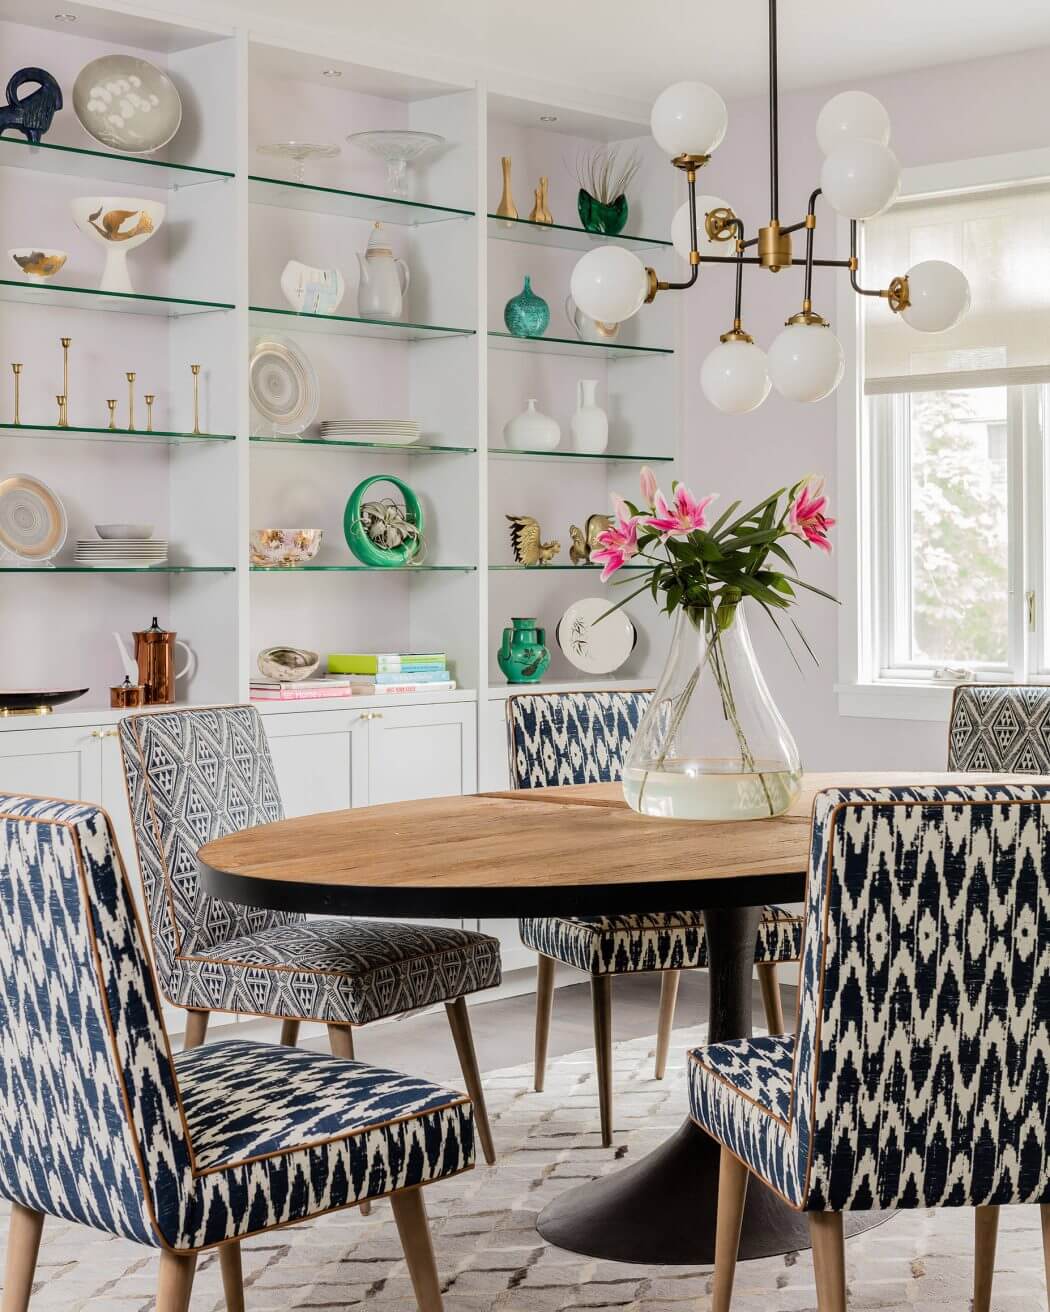 Home in Larchmont by colorTHEORY Boston